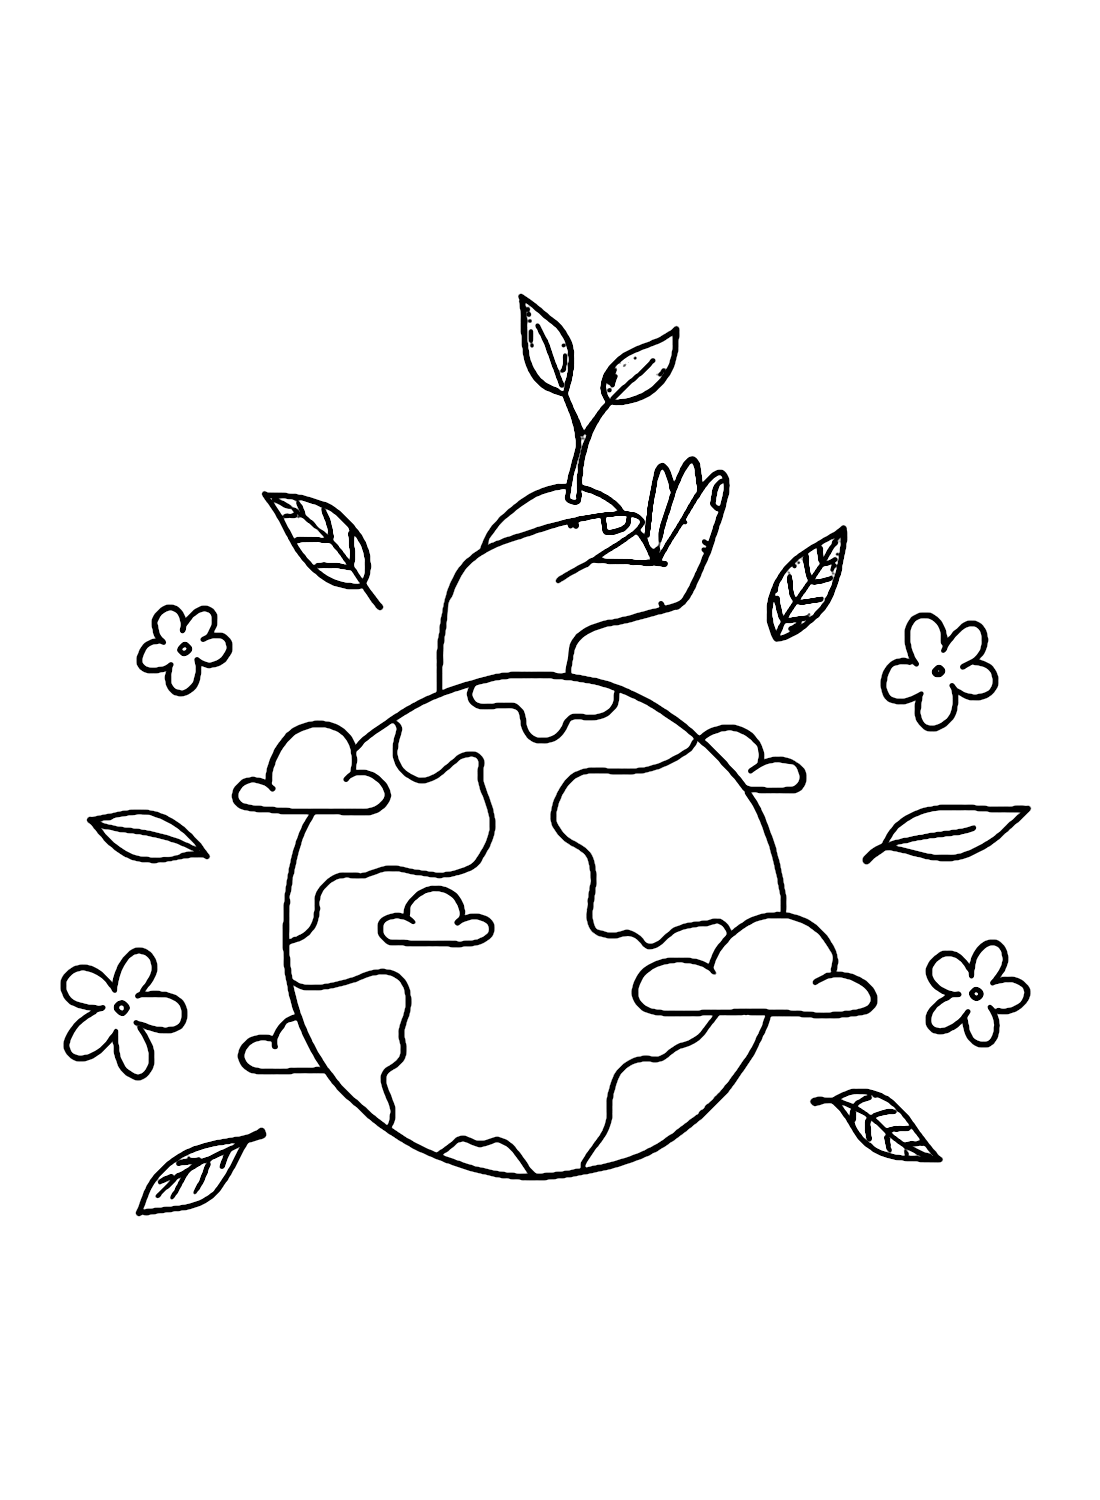 Eco Friendly for Kids Coloring Page